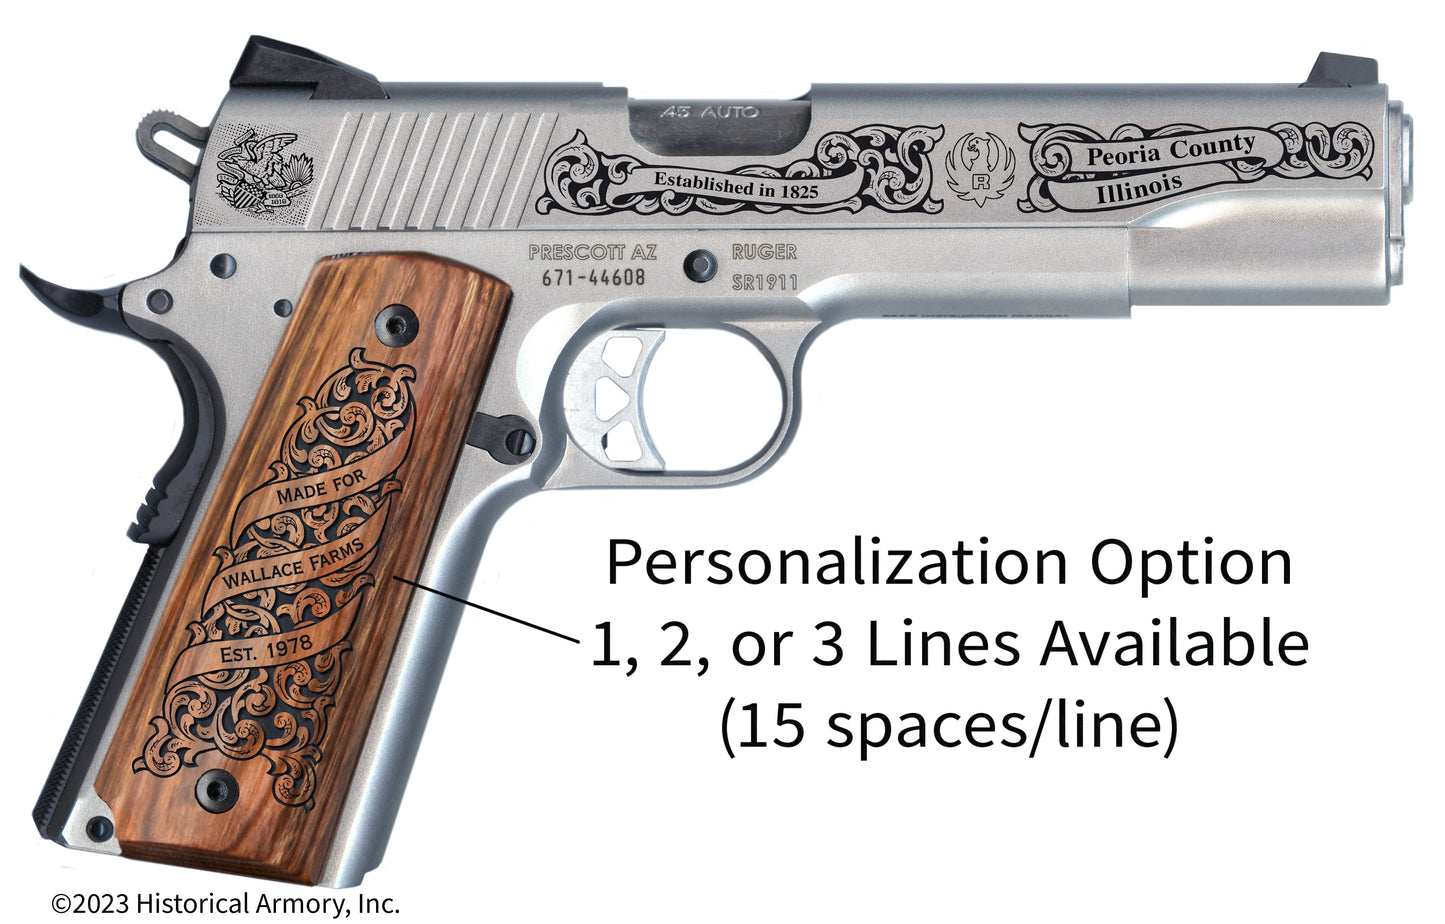 Peoria County Illinois Personalized Engraved .45 Auto Ruger 1911